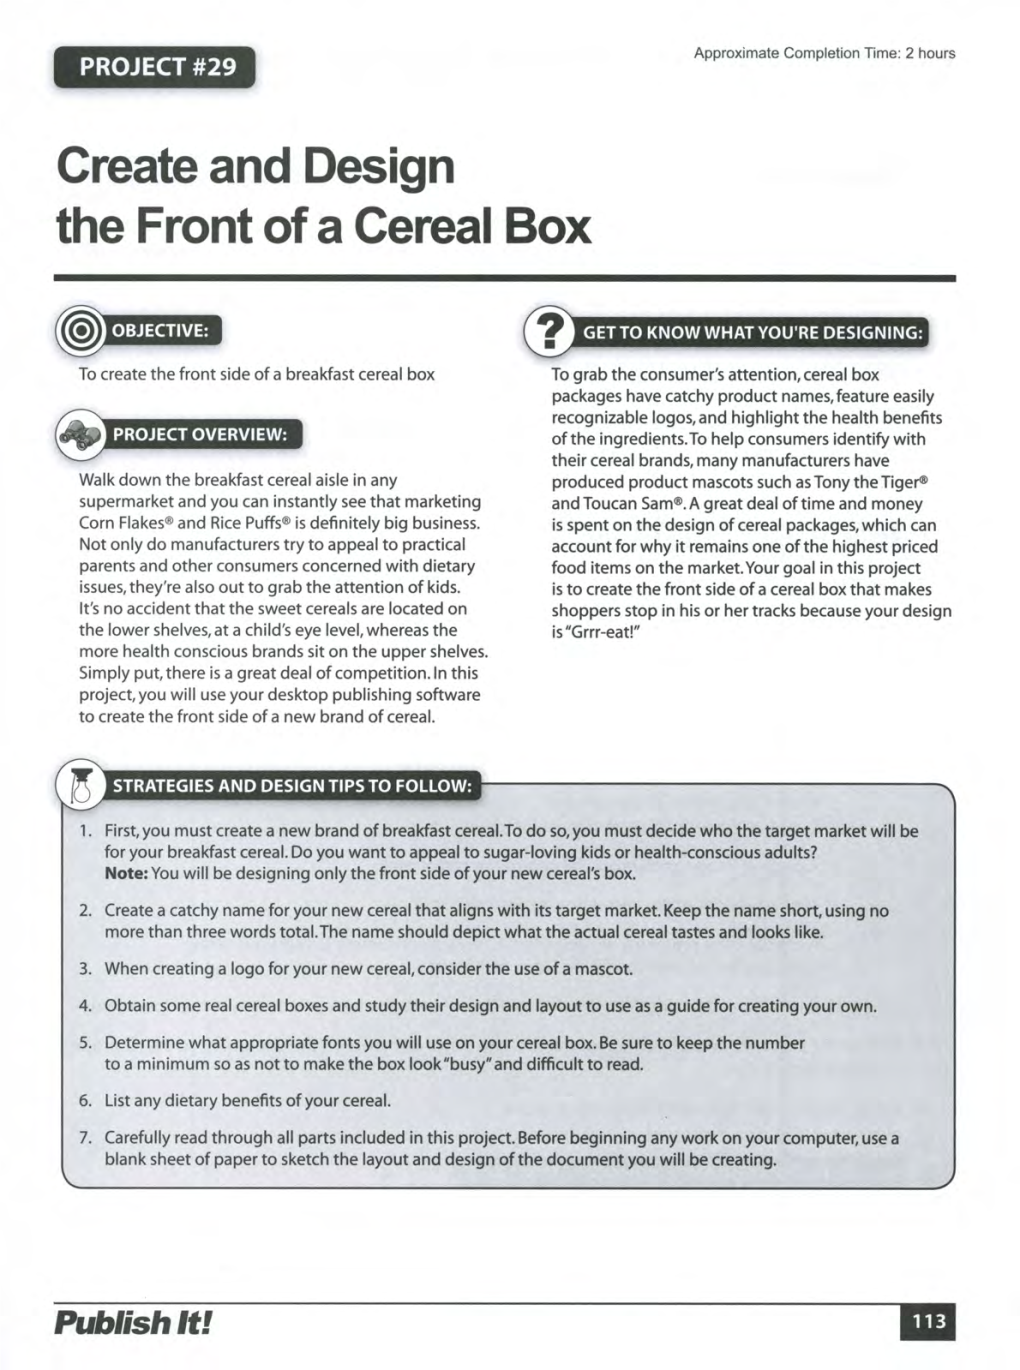 Create and Design the Front of a Cereal Box